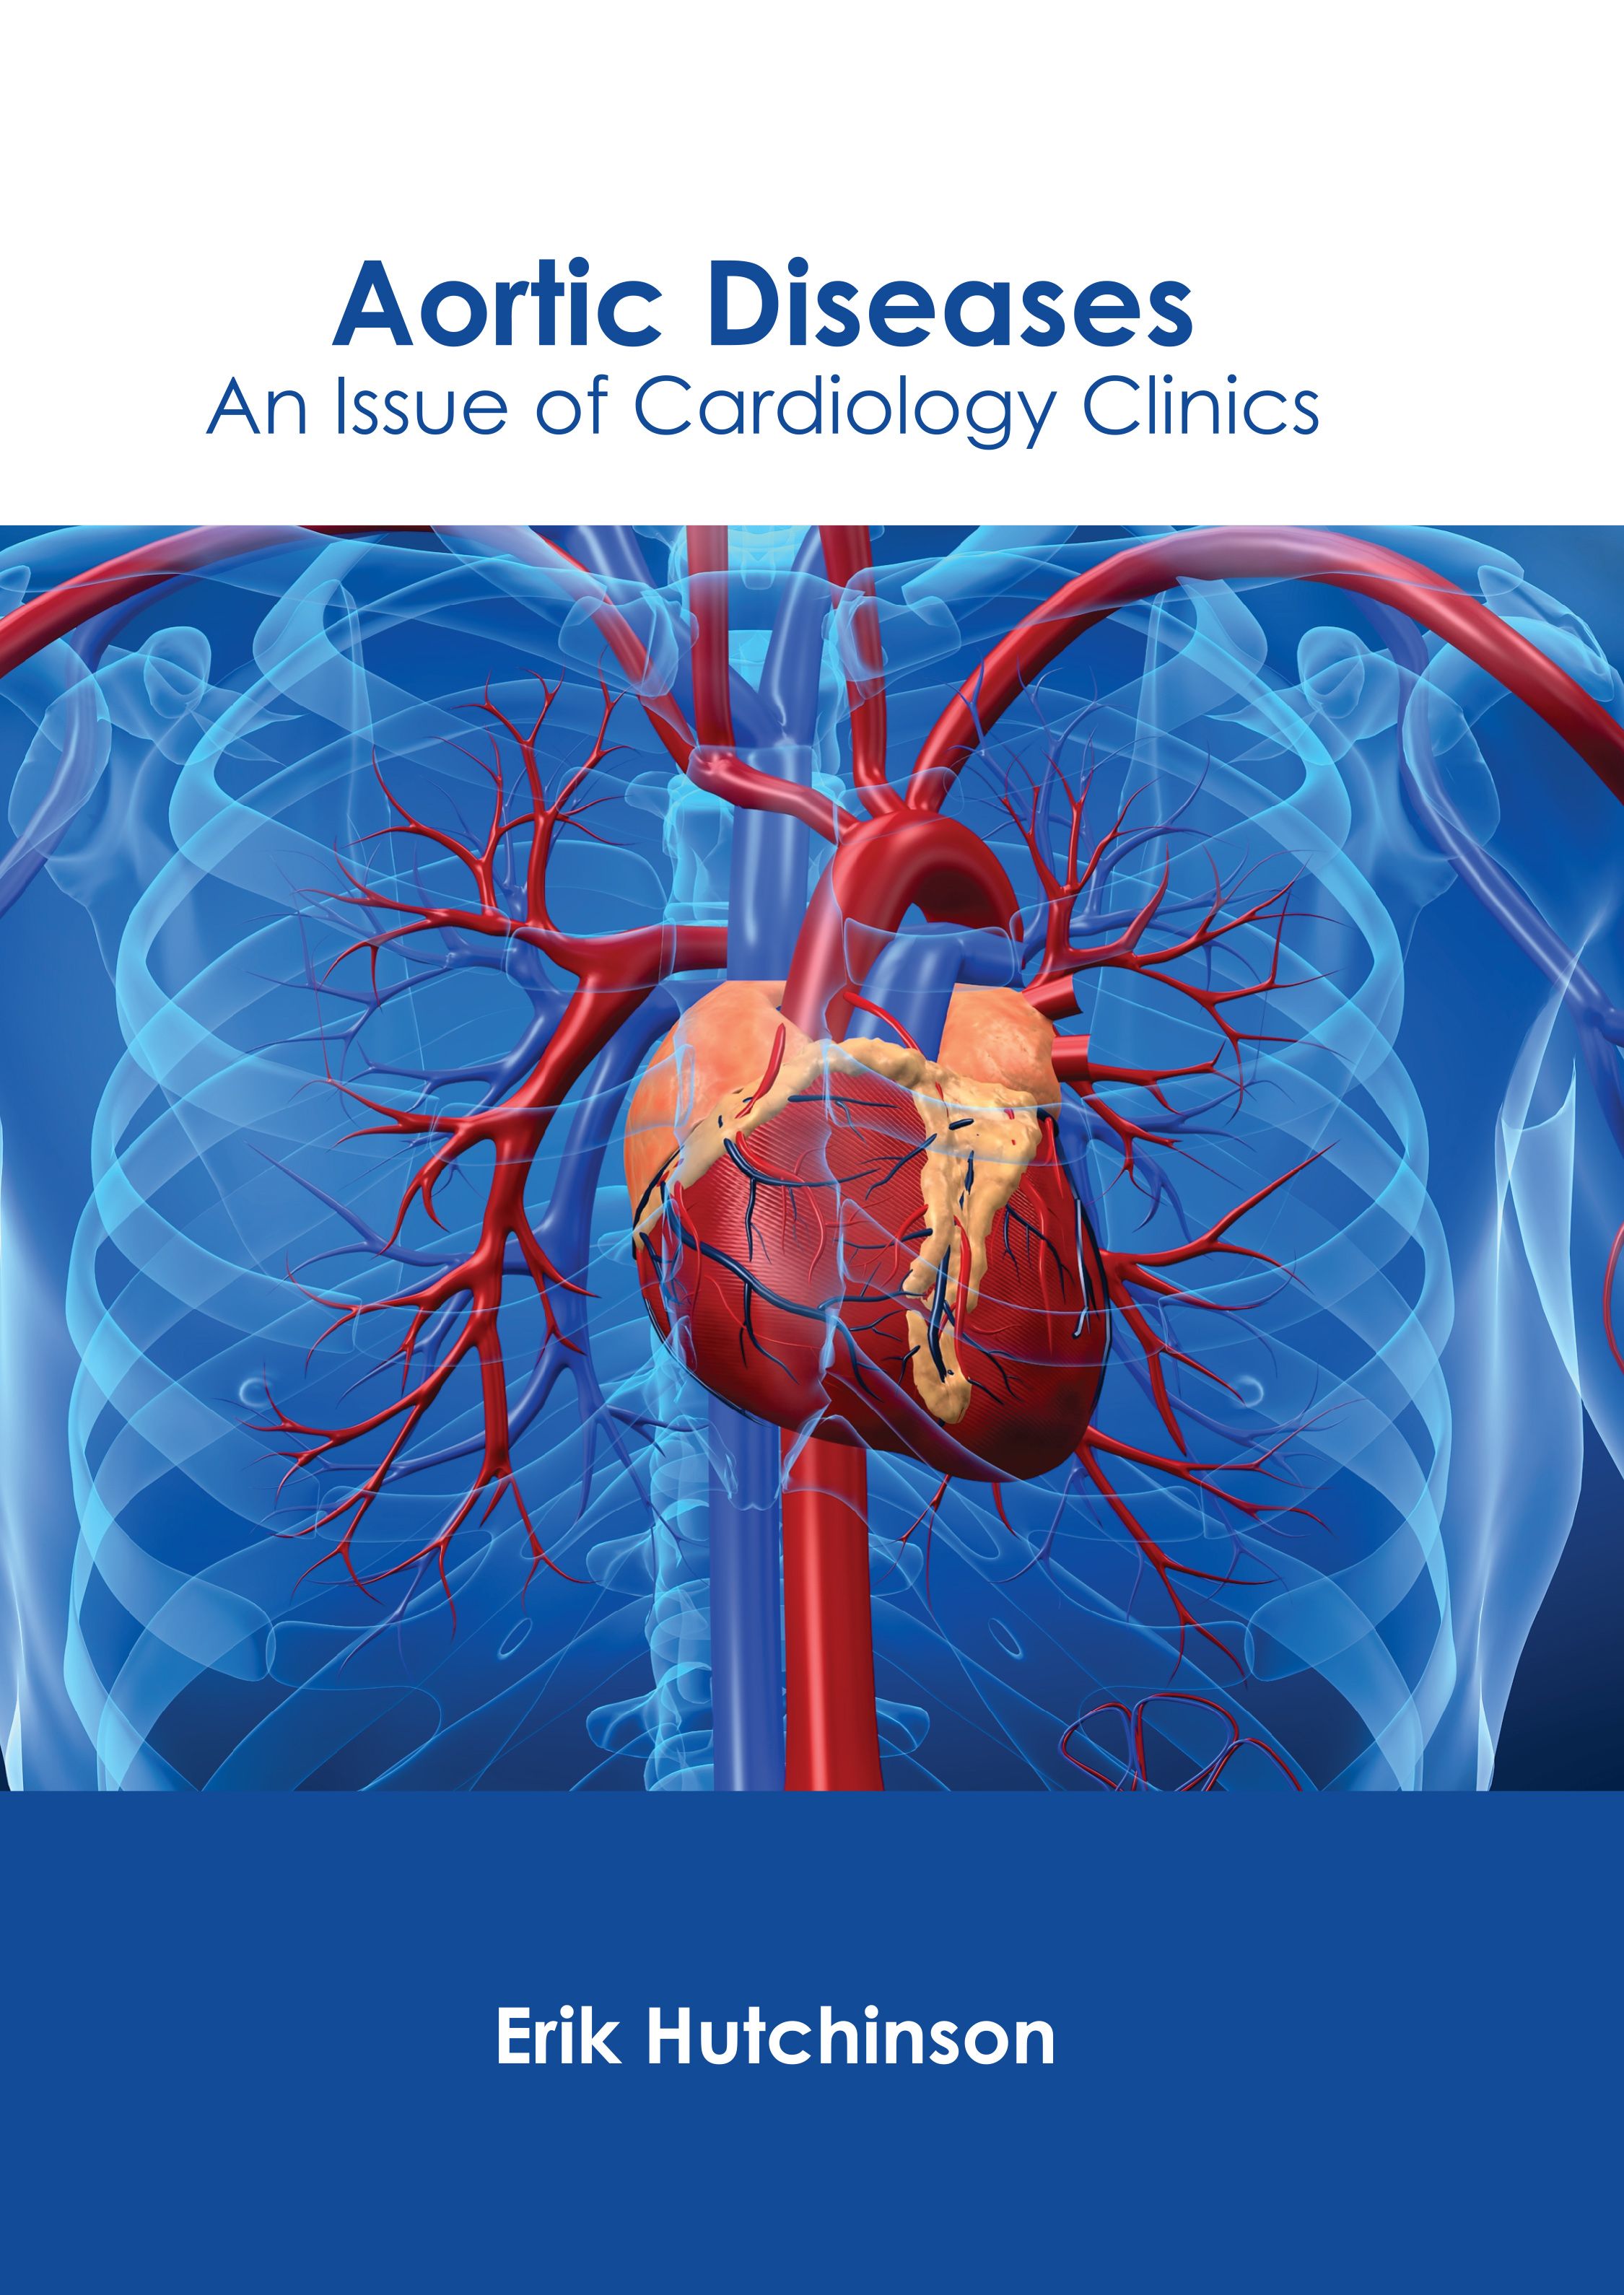 

exclusive-publishers/american-medical-publishers/aortic-diseases-an-issue-of-cardiology-clinics-9781639278923